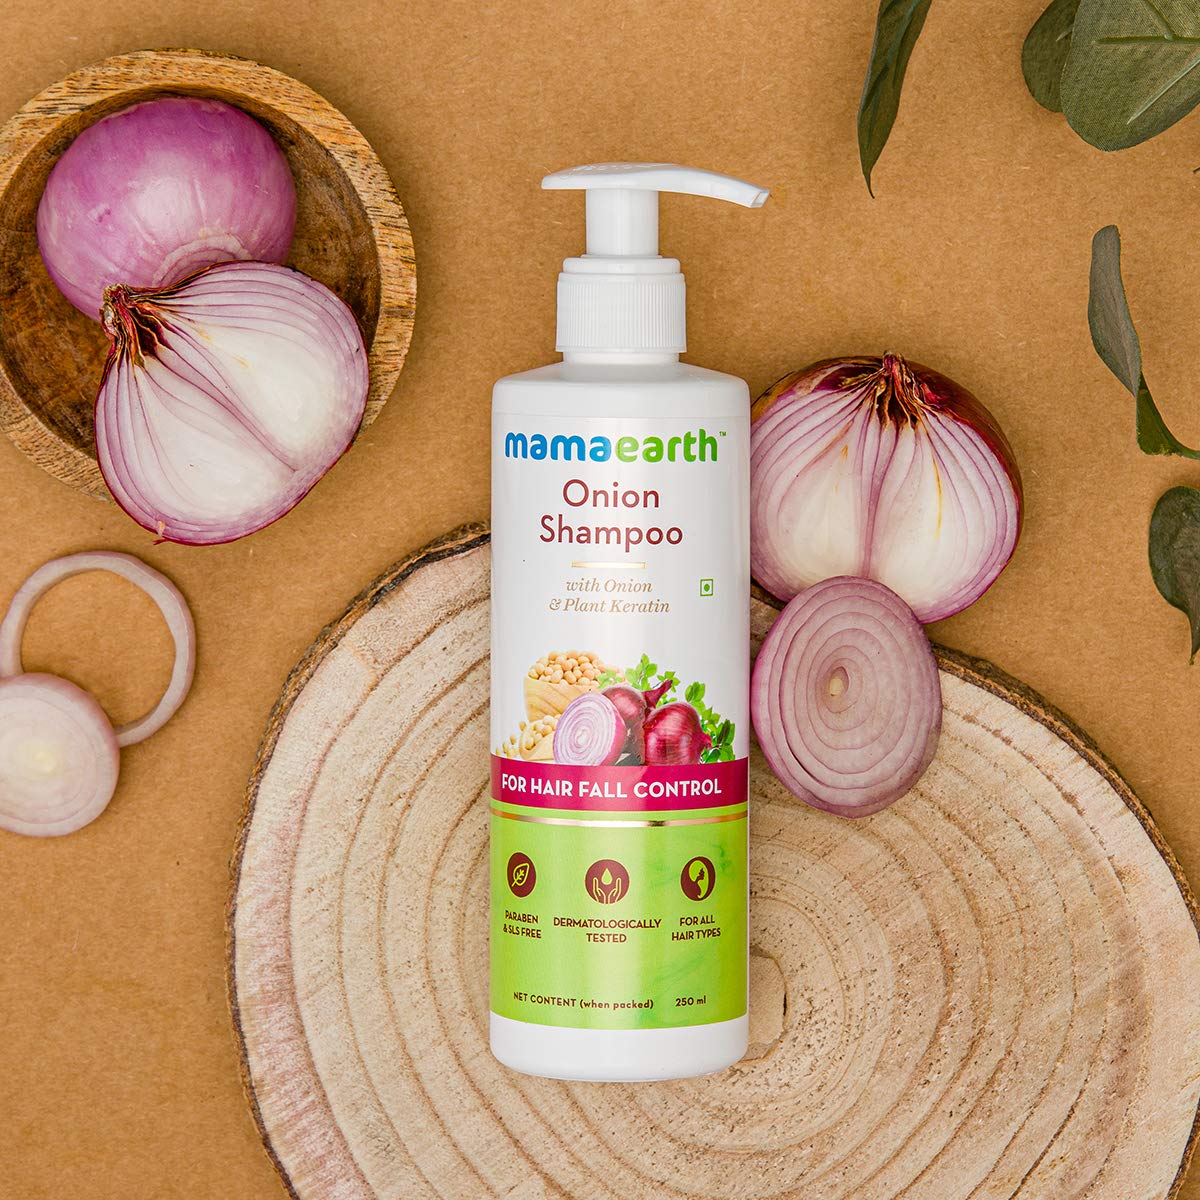 Mamaearth Onion Shampoo With Onion And Plant Keratin For Hair Fall Control  – 250ml - Cureka - Online Health Care Products Shop